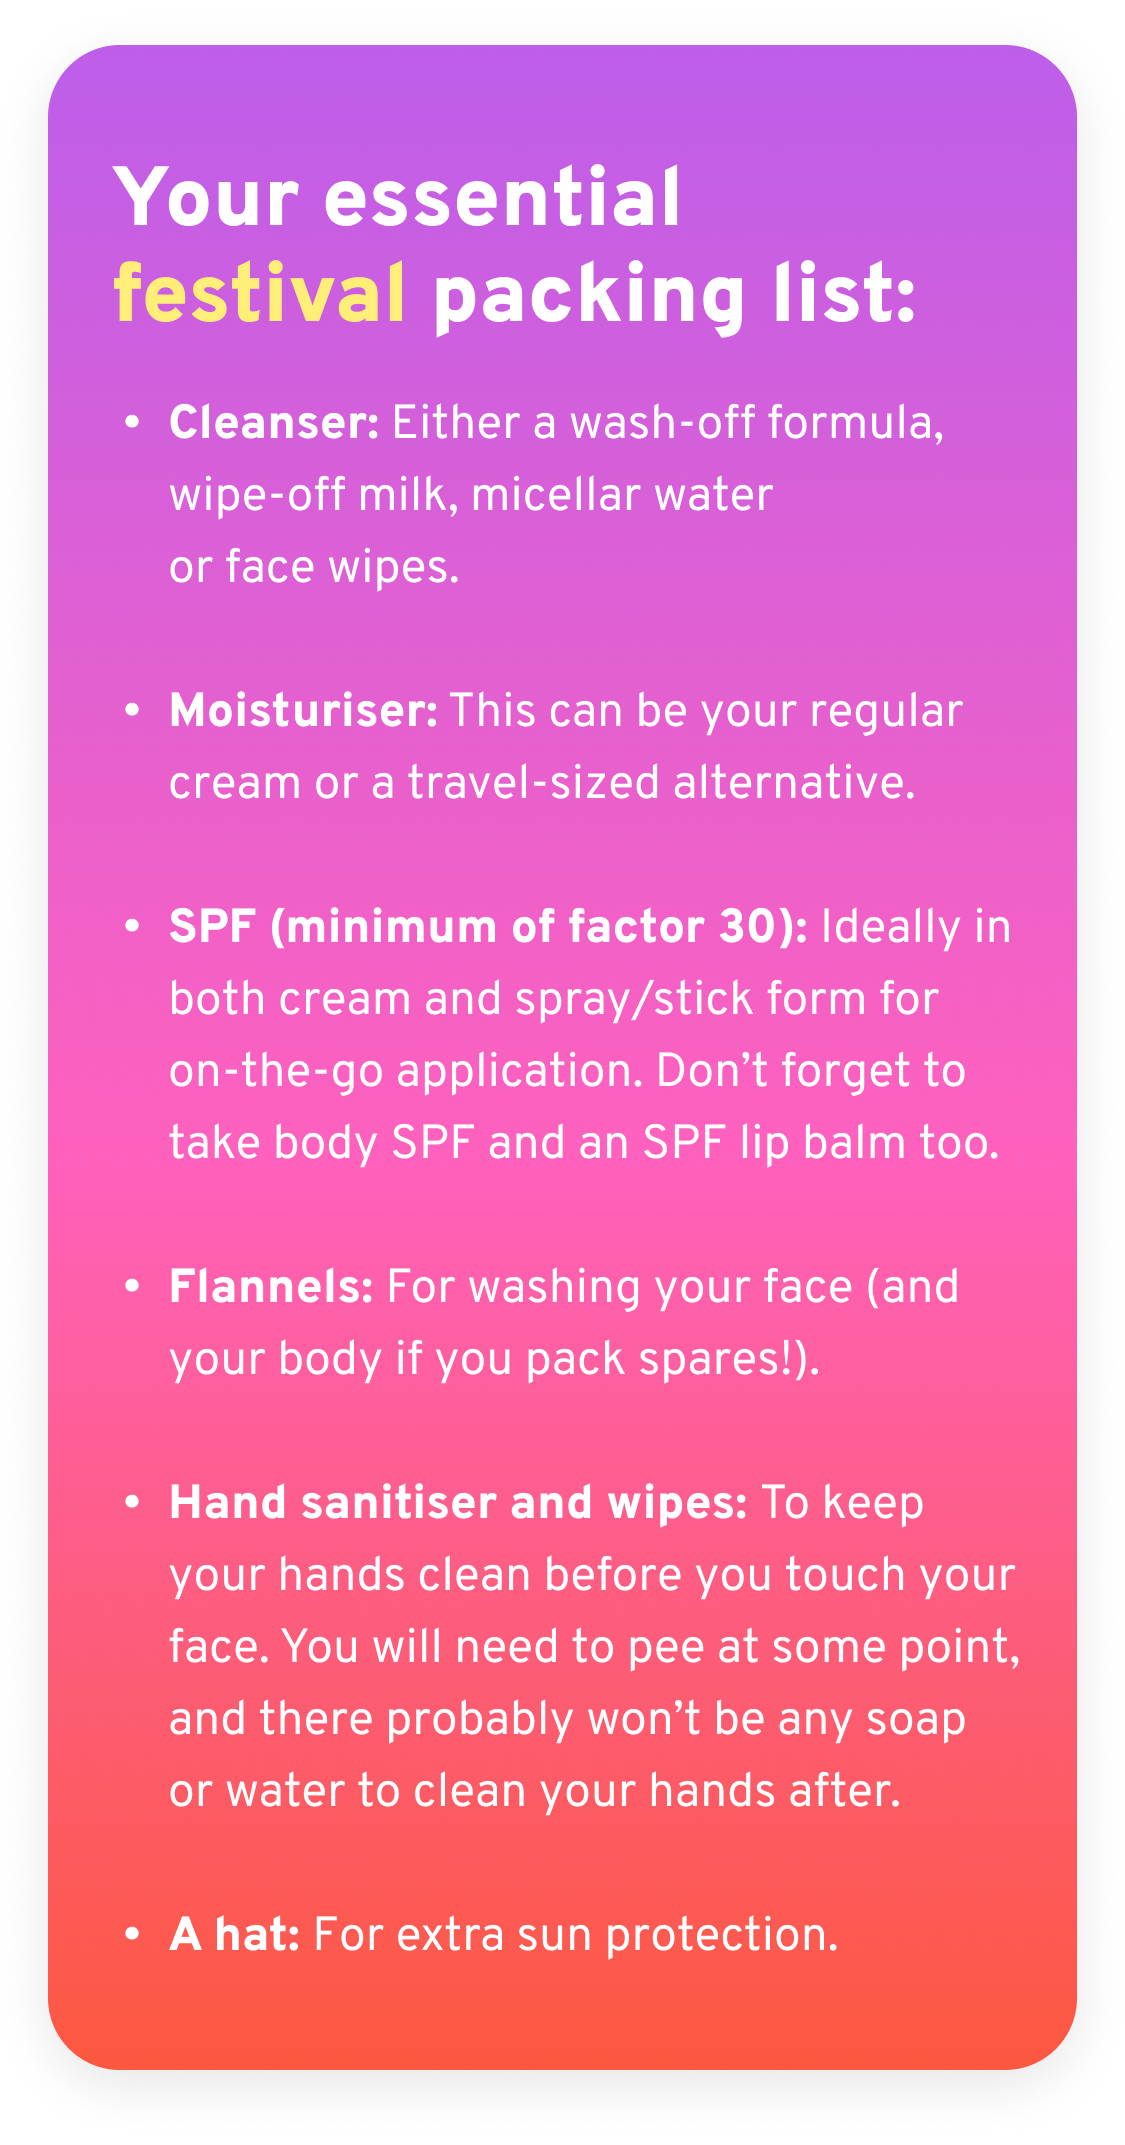  Your essential, skin-friendly festival packing list:  - Cleanser: A wash-off formula or wipe-off milk, micellar water with cotton or reusable pads and/or face wipes.  - Moisturiser: This can be your regular cream or a travel-sized alternative.  - SPF (minimum of factor 30): Ideally in both cream and spray/stick form for on-the-go application. Don’t forget to take body SPF and SPF lip balms too.  - Flannels: For washing your face (and your body if you pack spares!).  - Hand sanitiser and wipes: To keep your hands clean before your touch your face. You will need to pee at some point and there probably won’t be any soap or water to clean your hands after.  - A hat for extra sun protection.